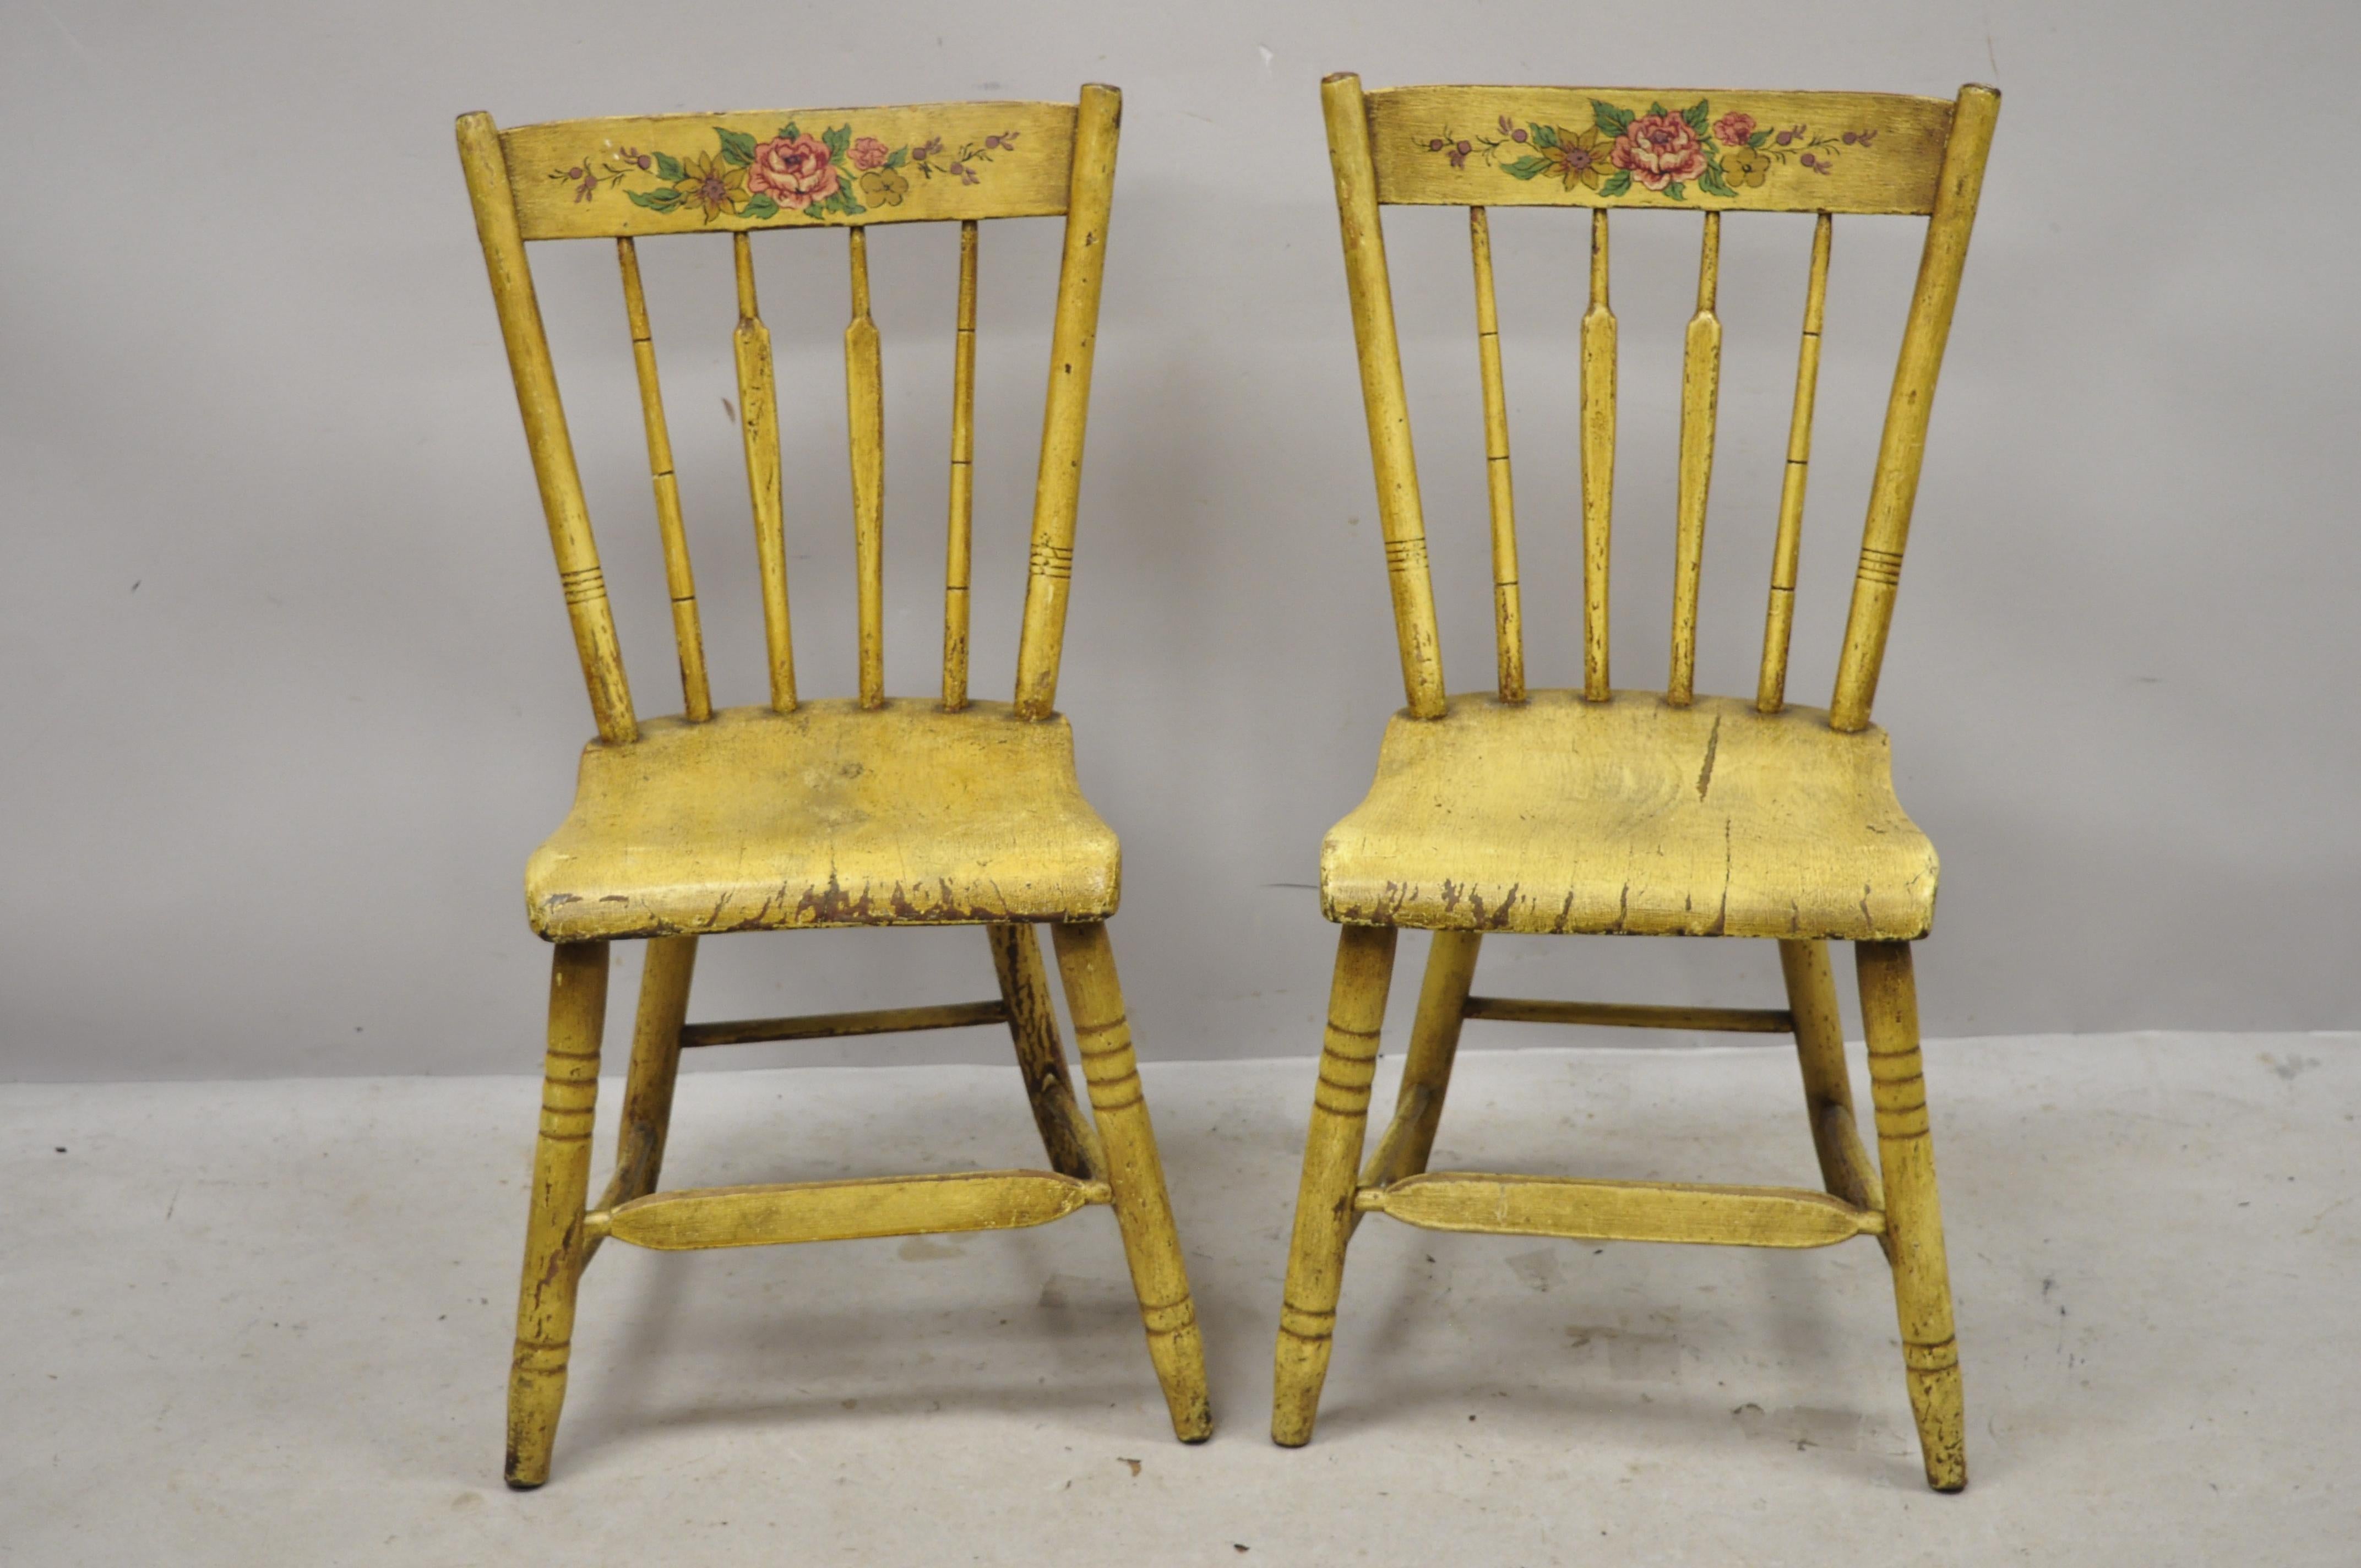 Frederick Loeser & Co Yellow Primitive Hitchcock Style Side Chairs, Pair 'B' For Sale 2